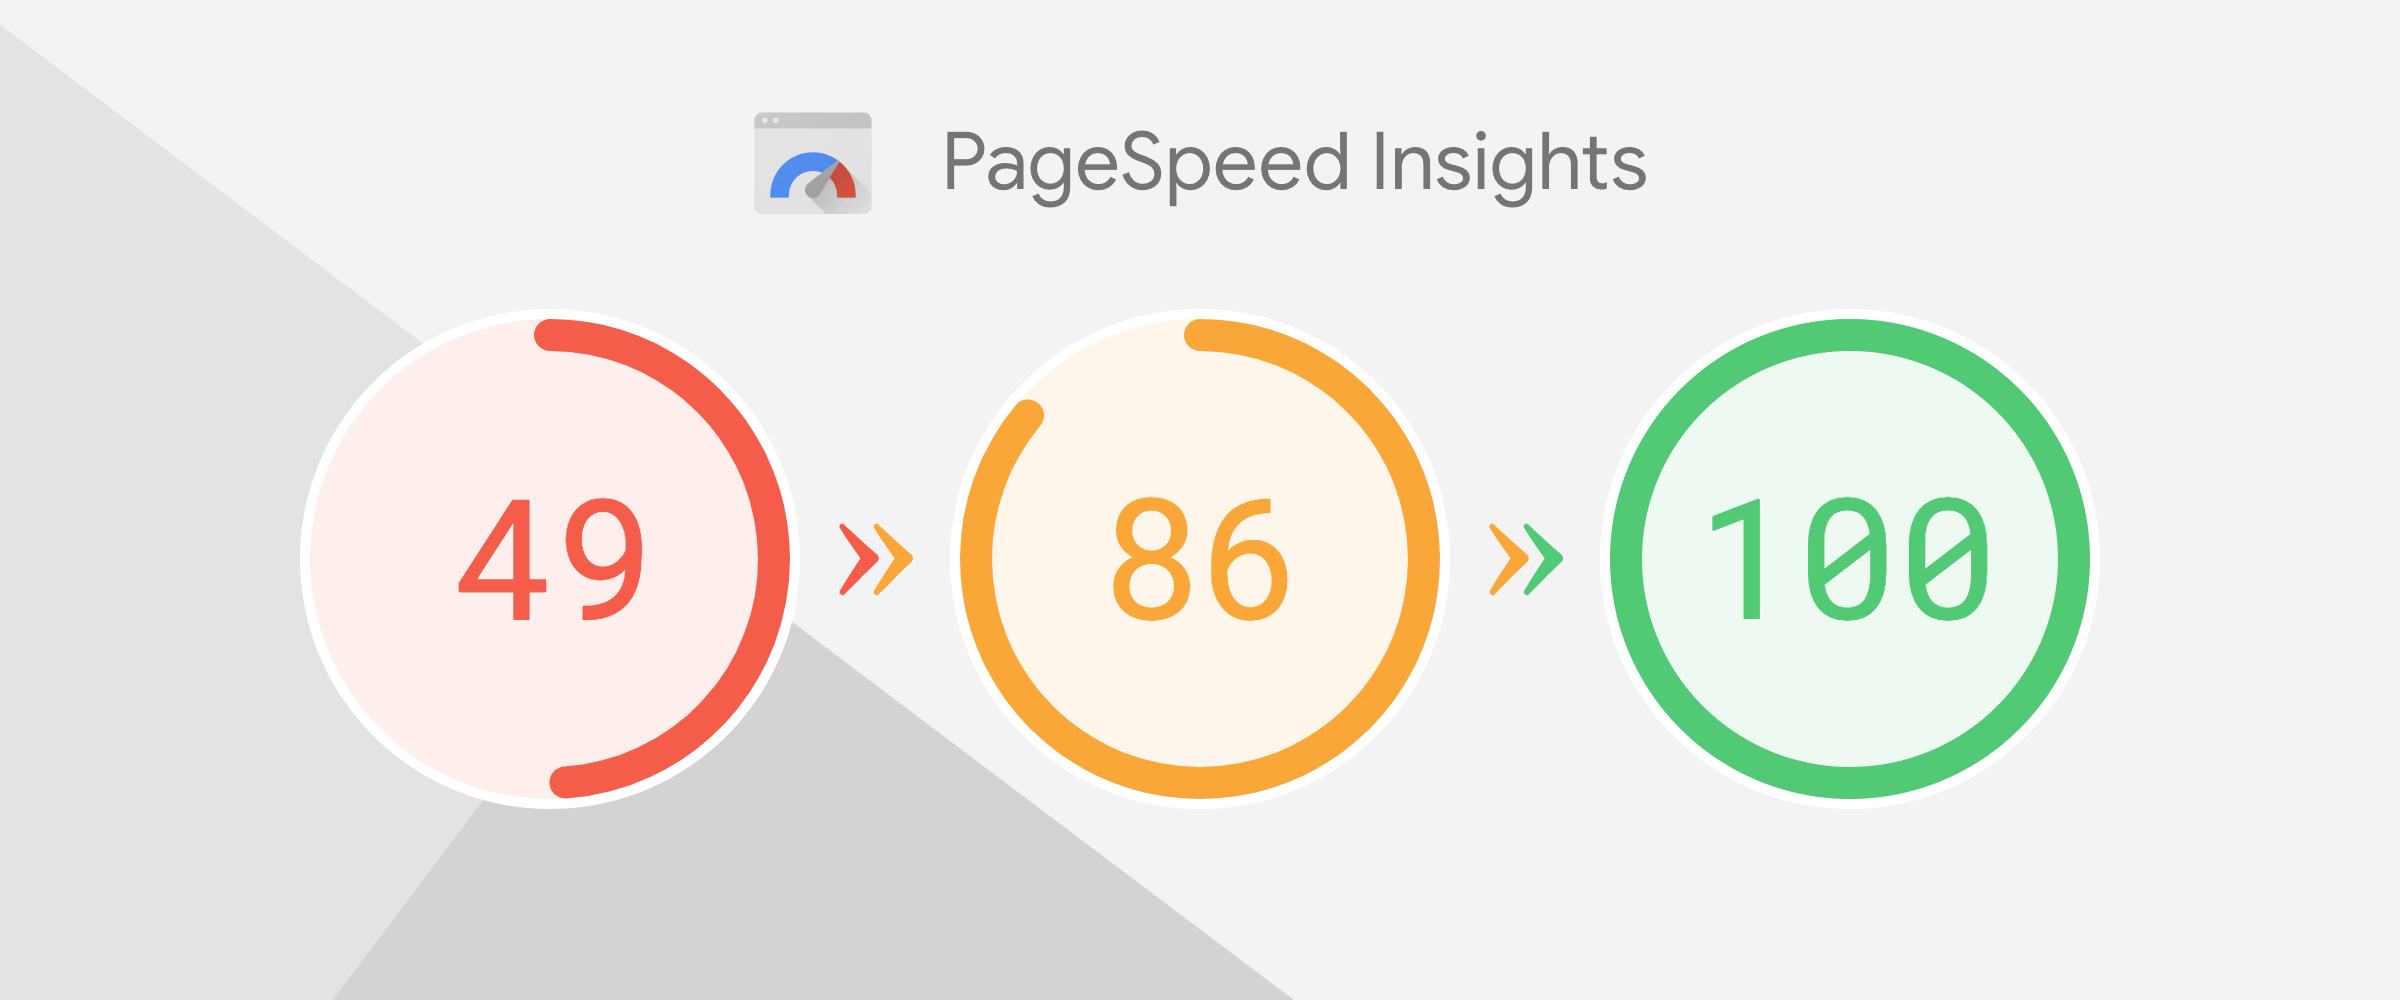 Magento SEO Optimization: Boost Your Site Speed